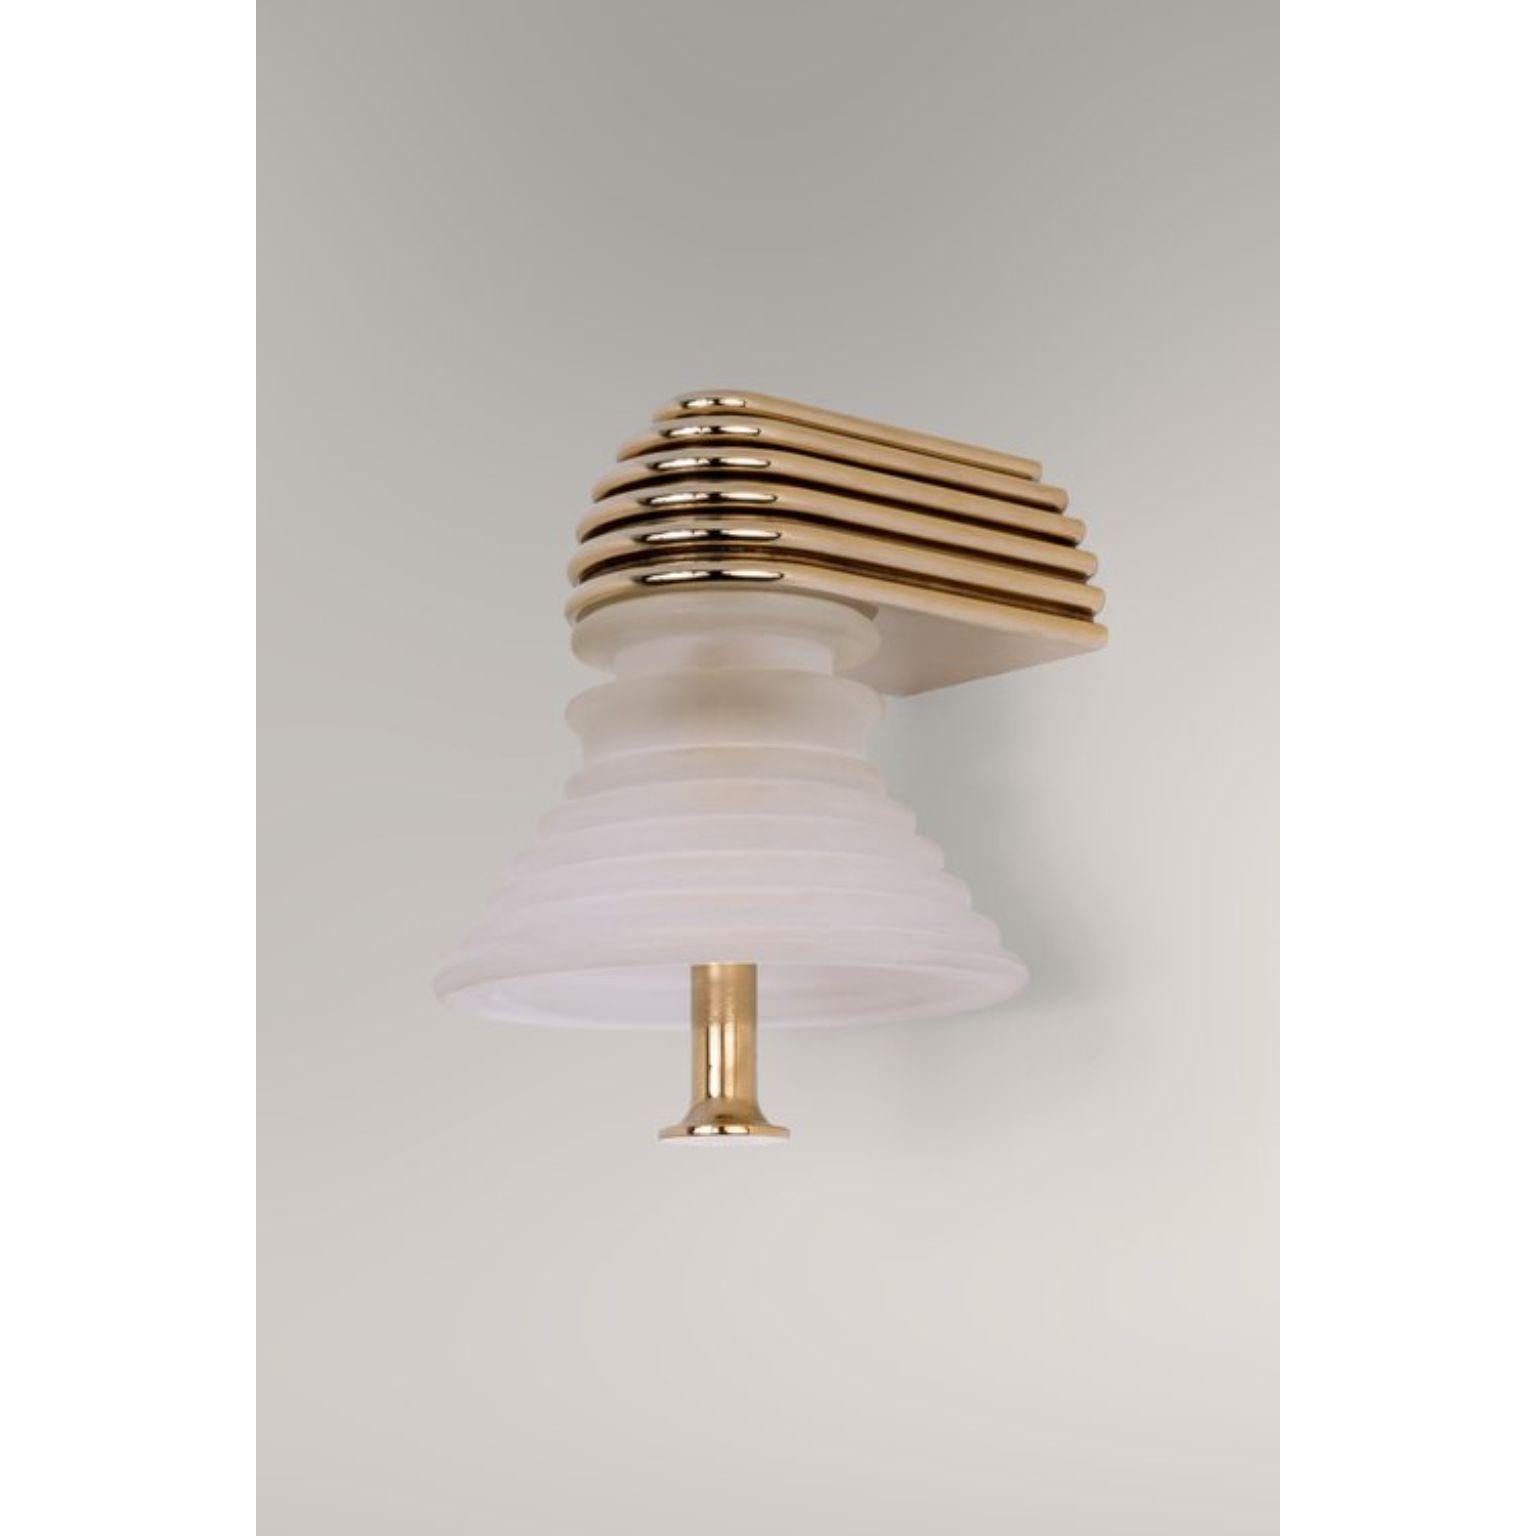 Insulator A Frosted Glass and Polished Brass Sconce by Novocastrian
Dimensions: Ø 14 x H 21 cm.
Materials: Frosted glass and polished brass.  

All products are available in custom dimensions and finishes. Rods can be cut to length or provided at